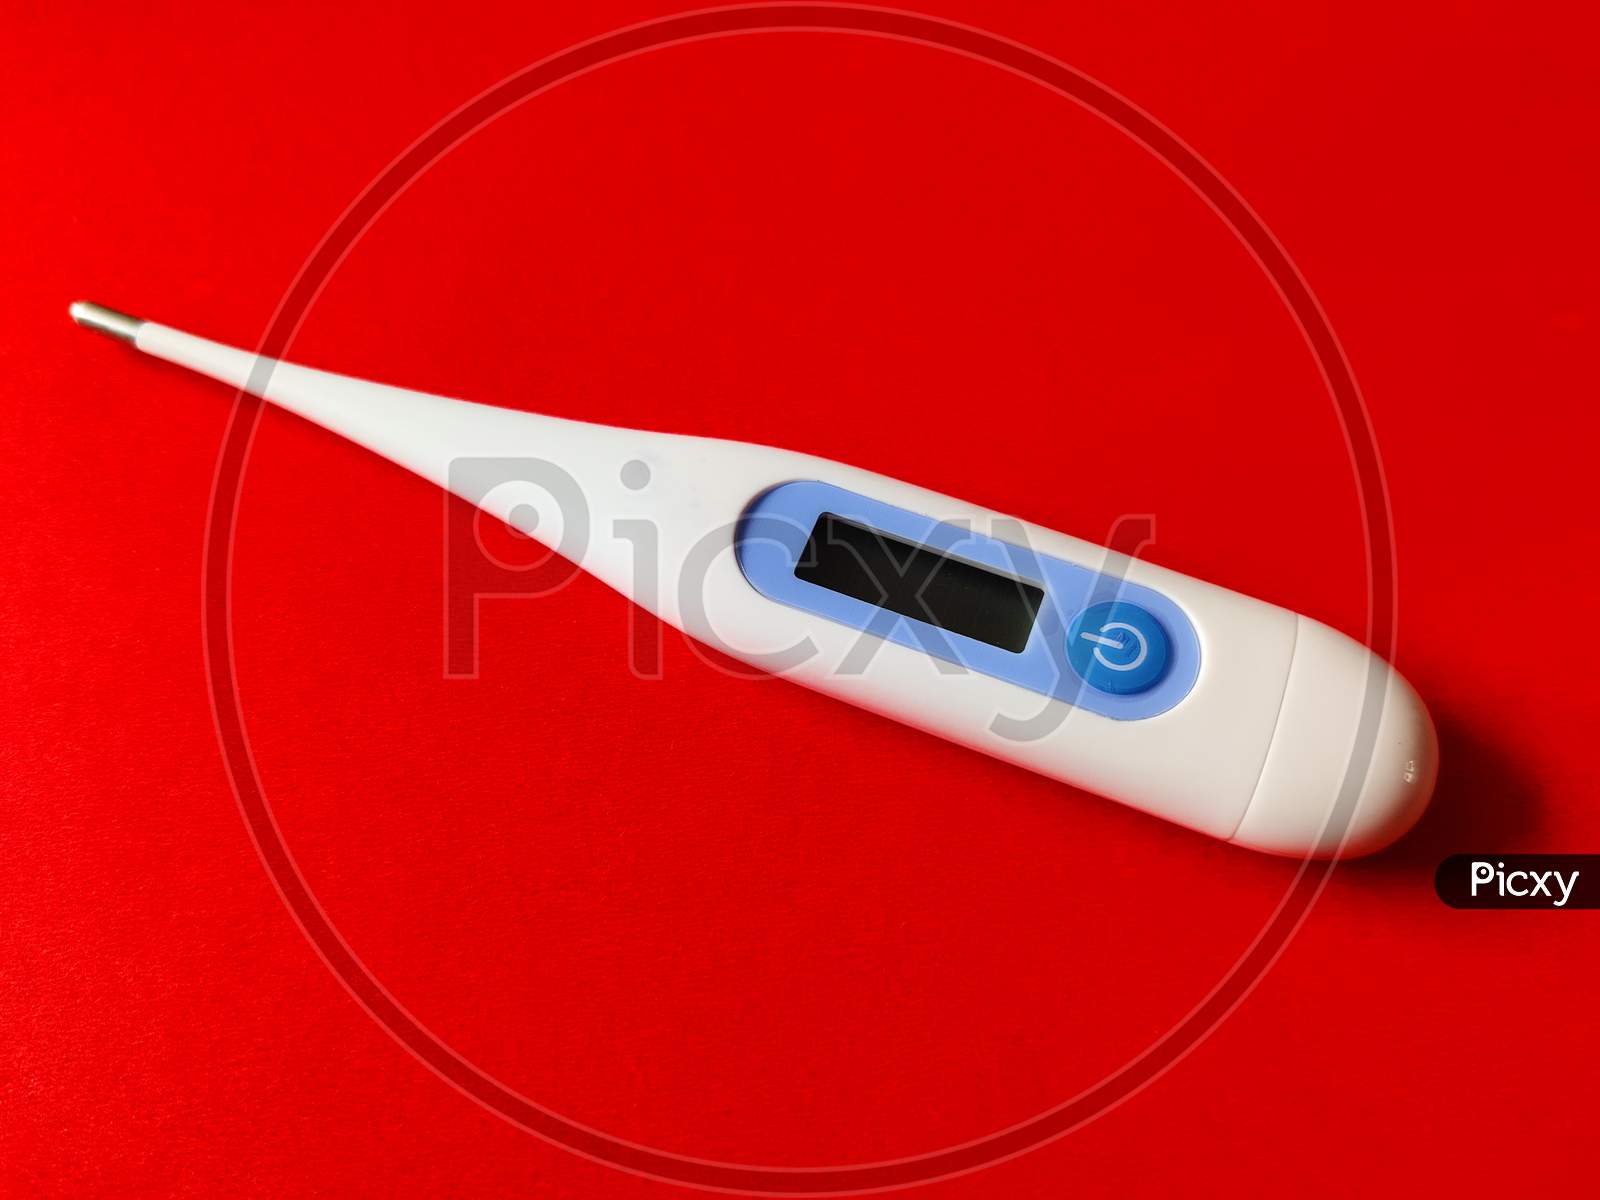 Digital Thermometer For Measuring Temperature. Isolated On Red Background.